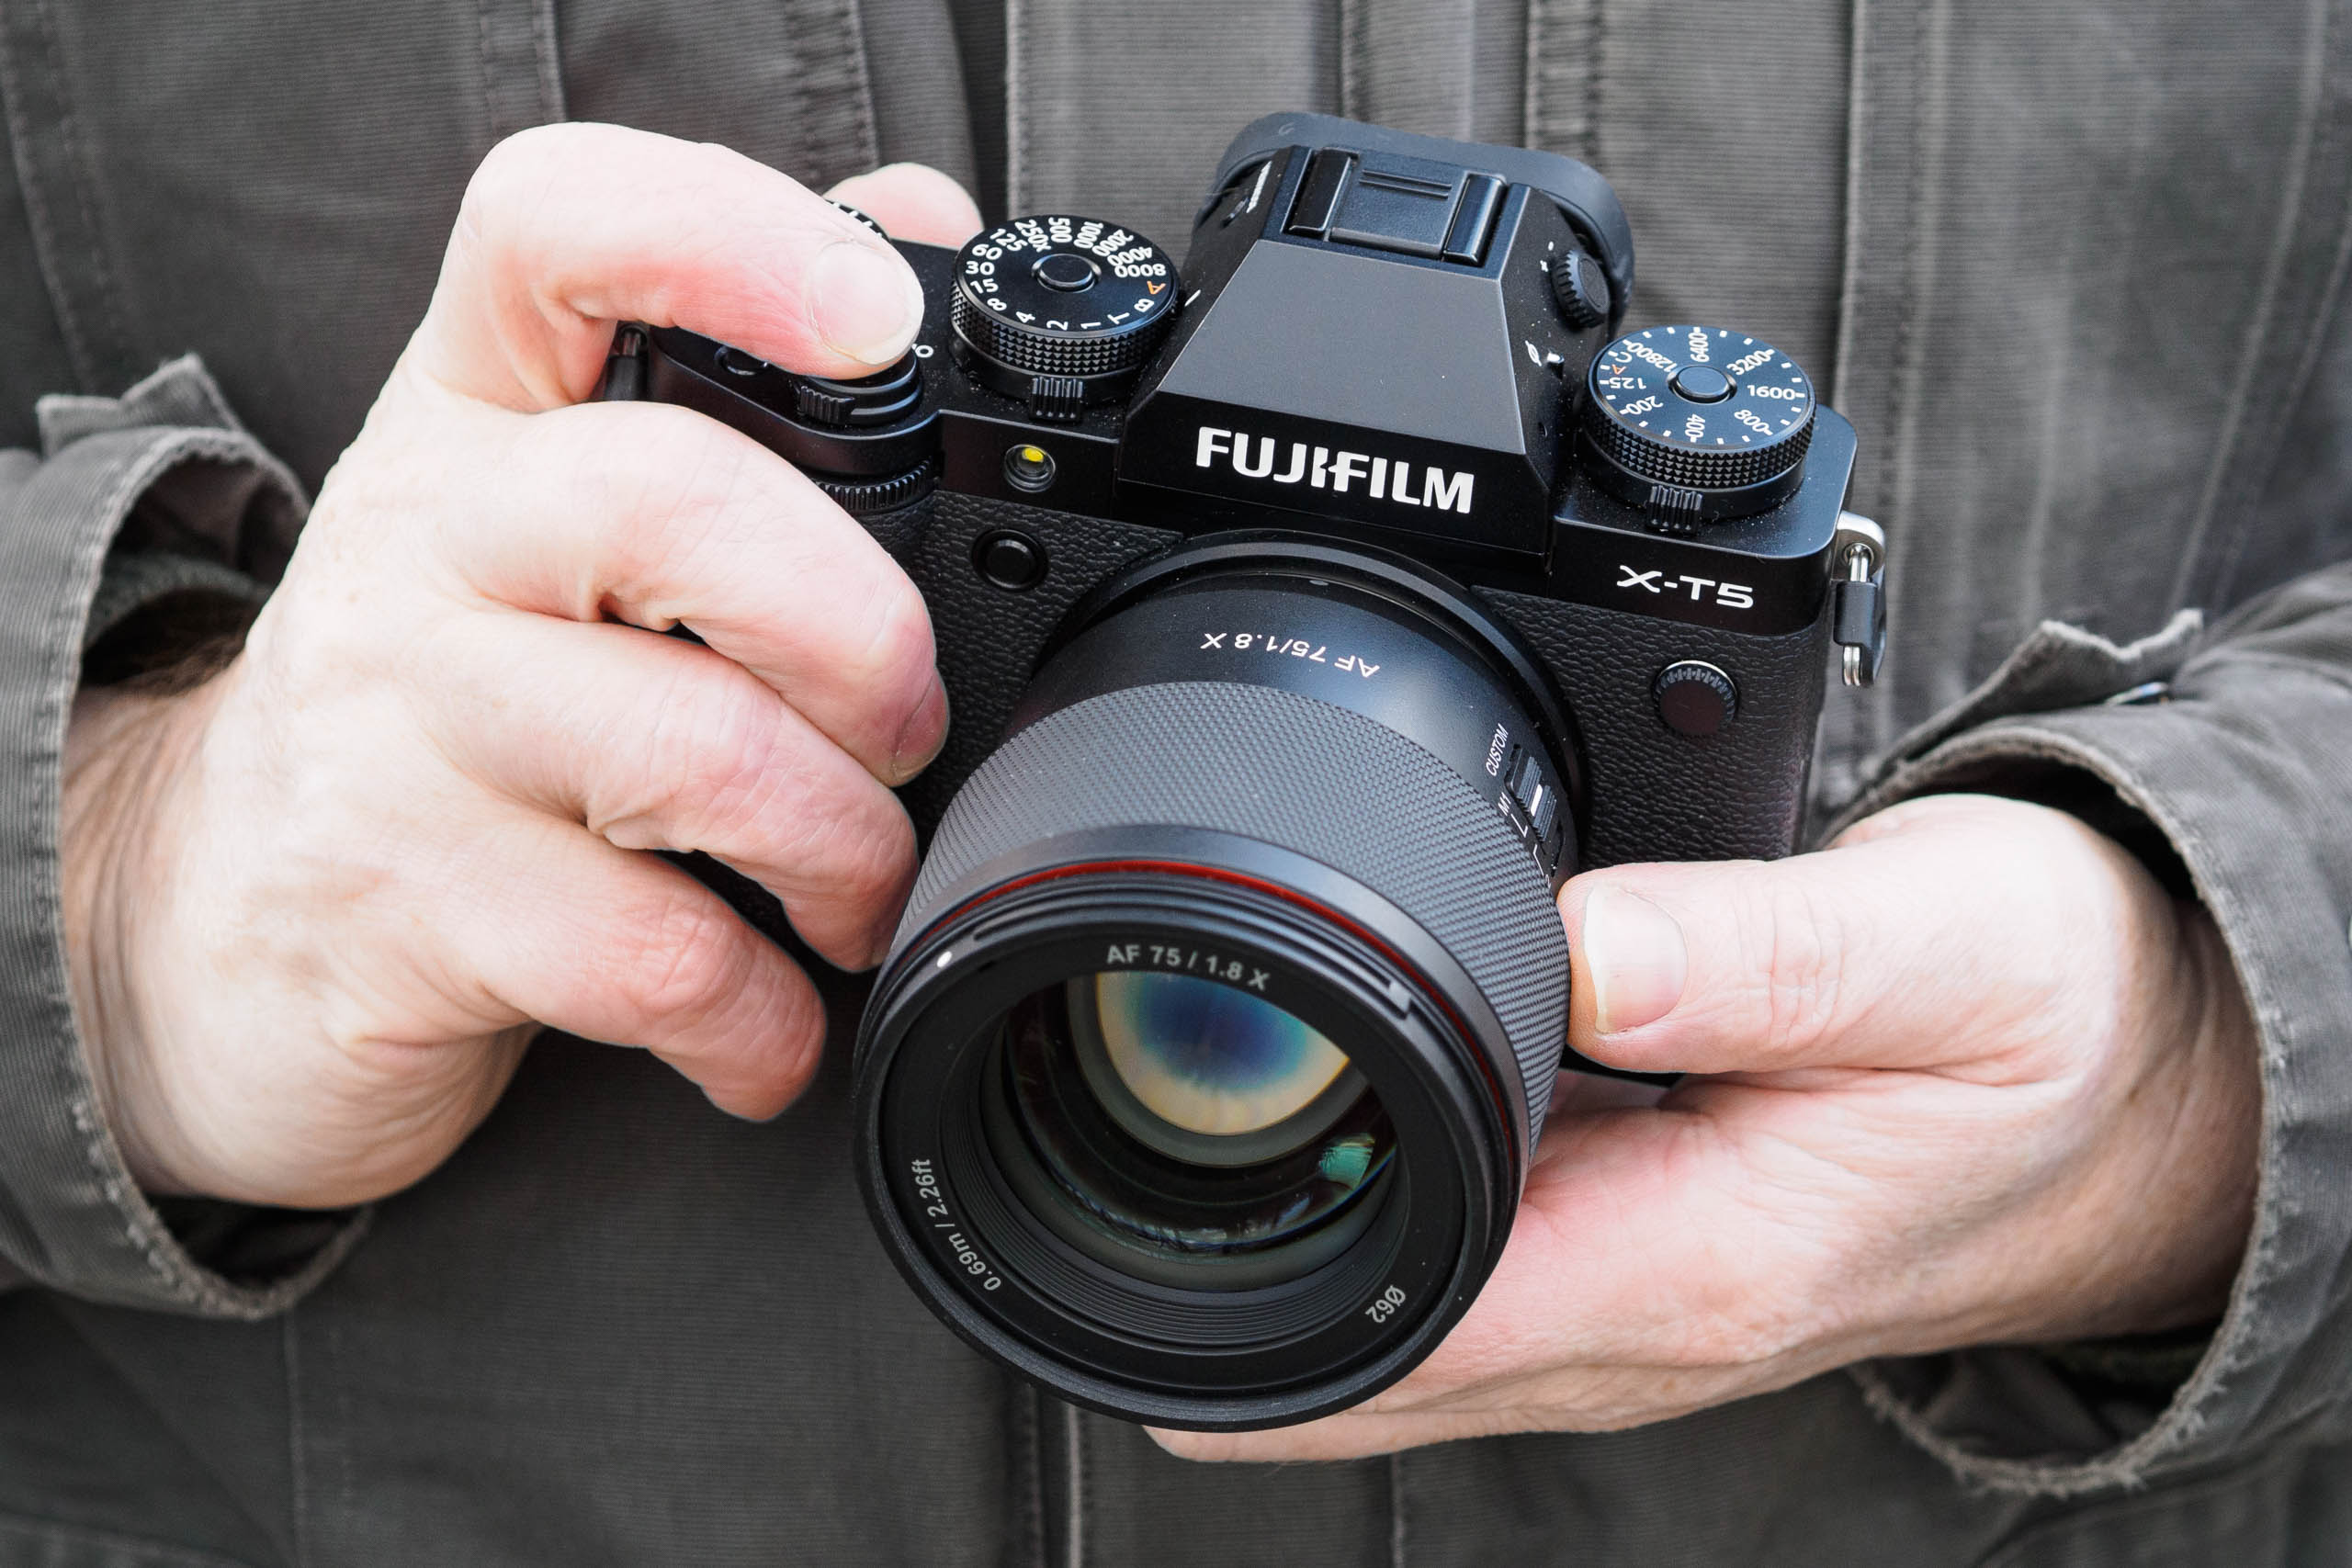 AF 75mm F1.8 X review - Photographer